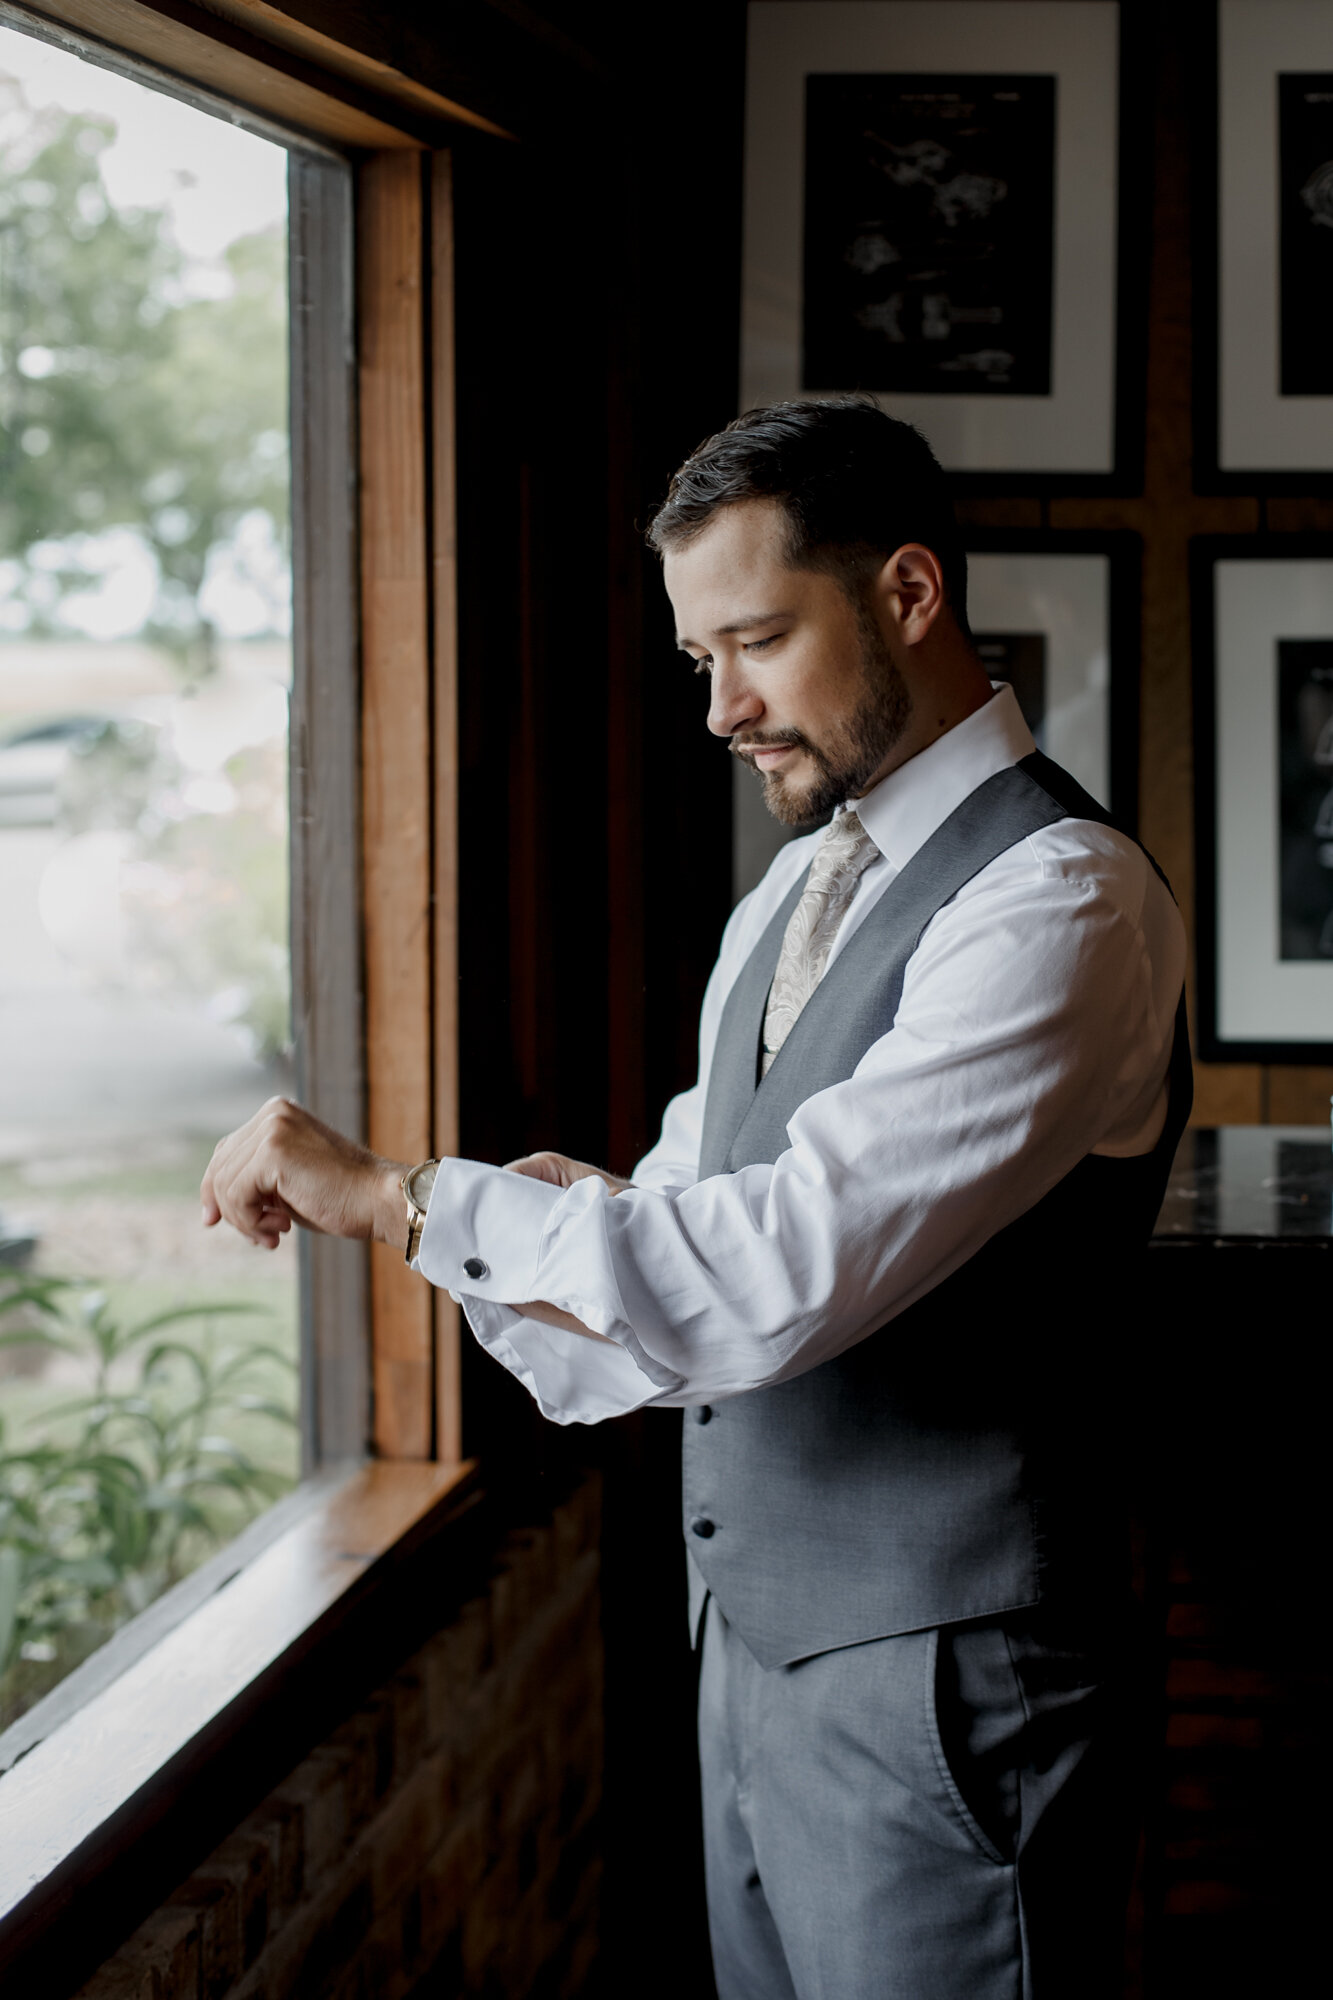 Groom getting ready by the window. Glowing Wedding in Golden Champagne Tones at The Orchard at Caney Creek in Wharton, TX